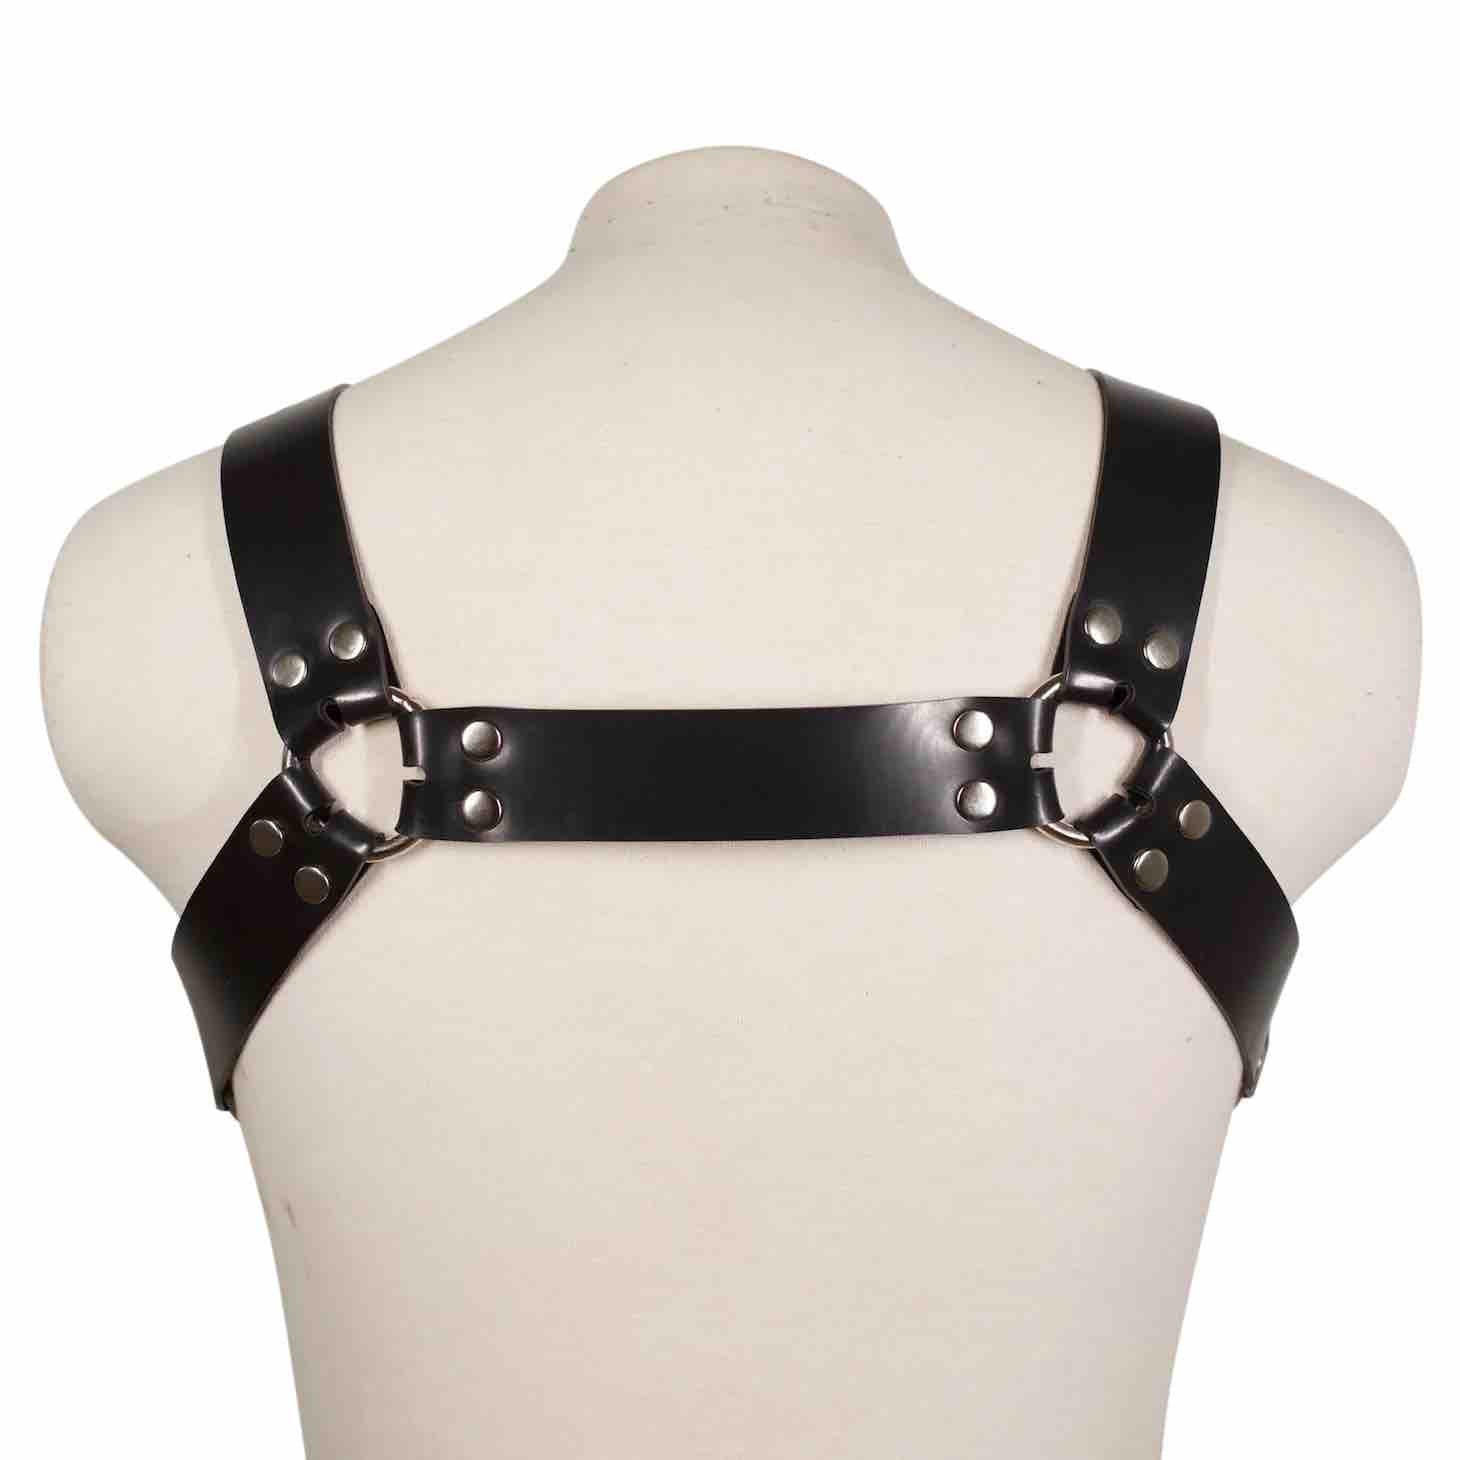 The back of the Rubber Bulldog Harness on a mannequin.